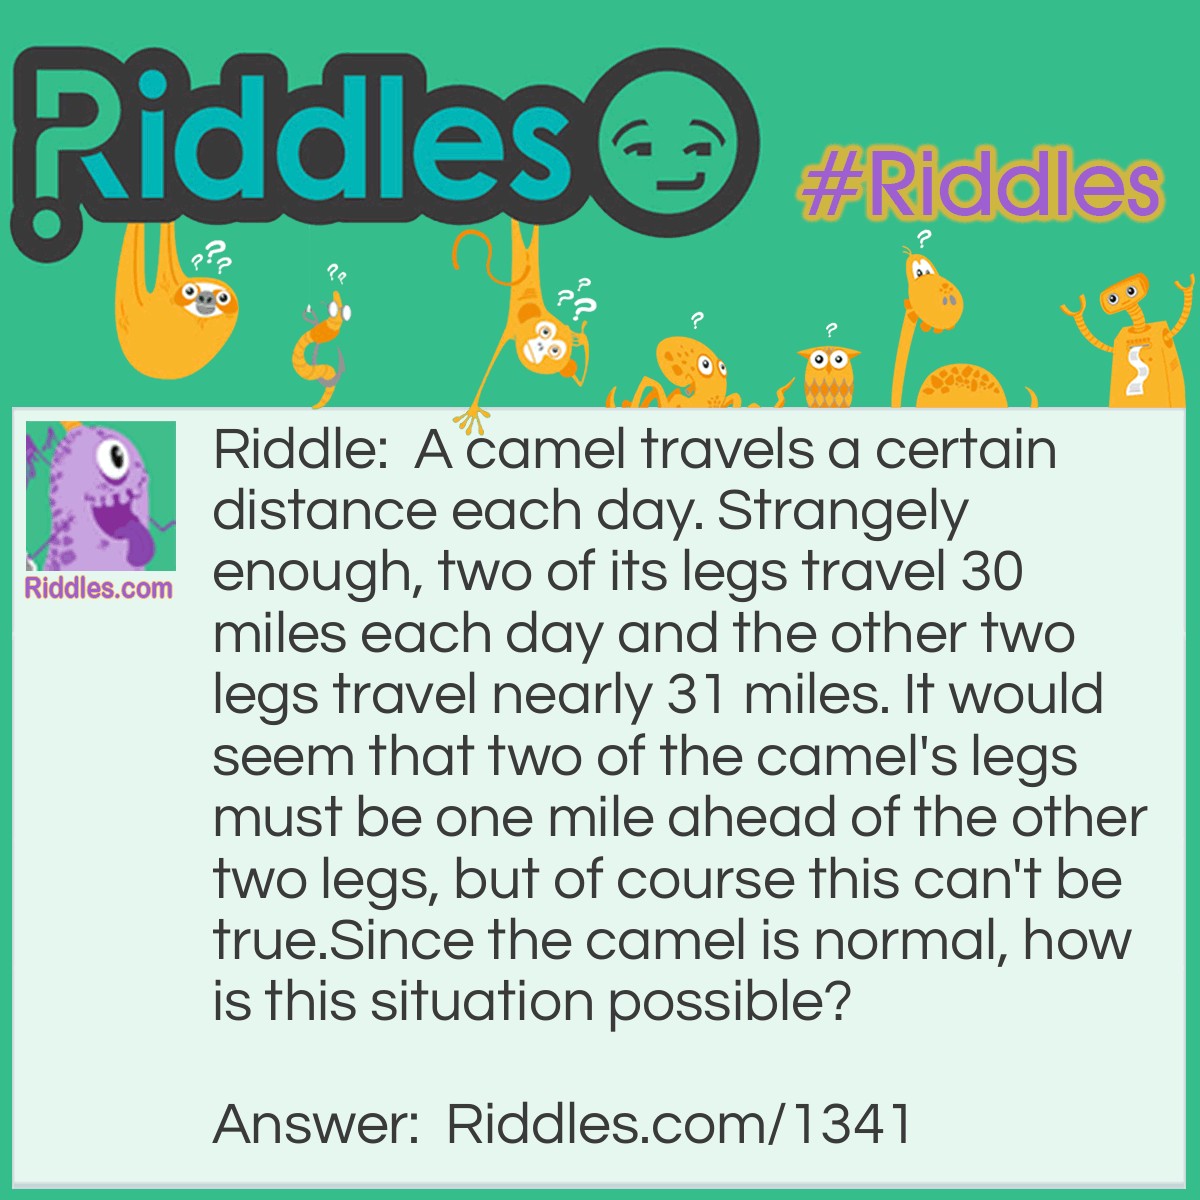 Riddle: A camel travels a certain distance each day. Strangely enough, two of its legs travel 30 miles each day and the other two legs travel nearly 31 miles. It would seem that two of the camel's legs must be one mile ahead of the other two legs, but of course this can't be true.
Since the camel is normal, how is this situation possible? Answer: The camel operates a mill and travels in a circular clockwise direction. The two outside legs will travel a greater distance than the two inside legs.